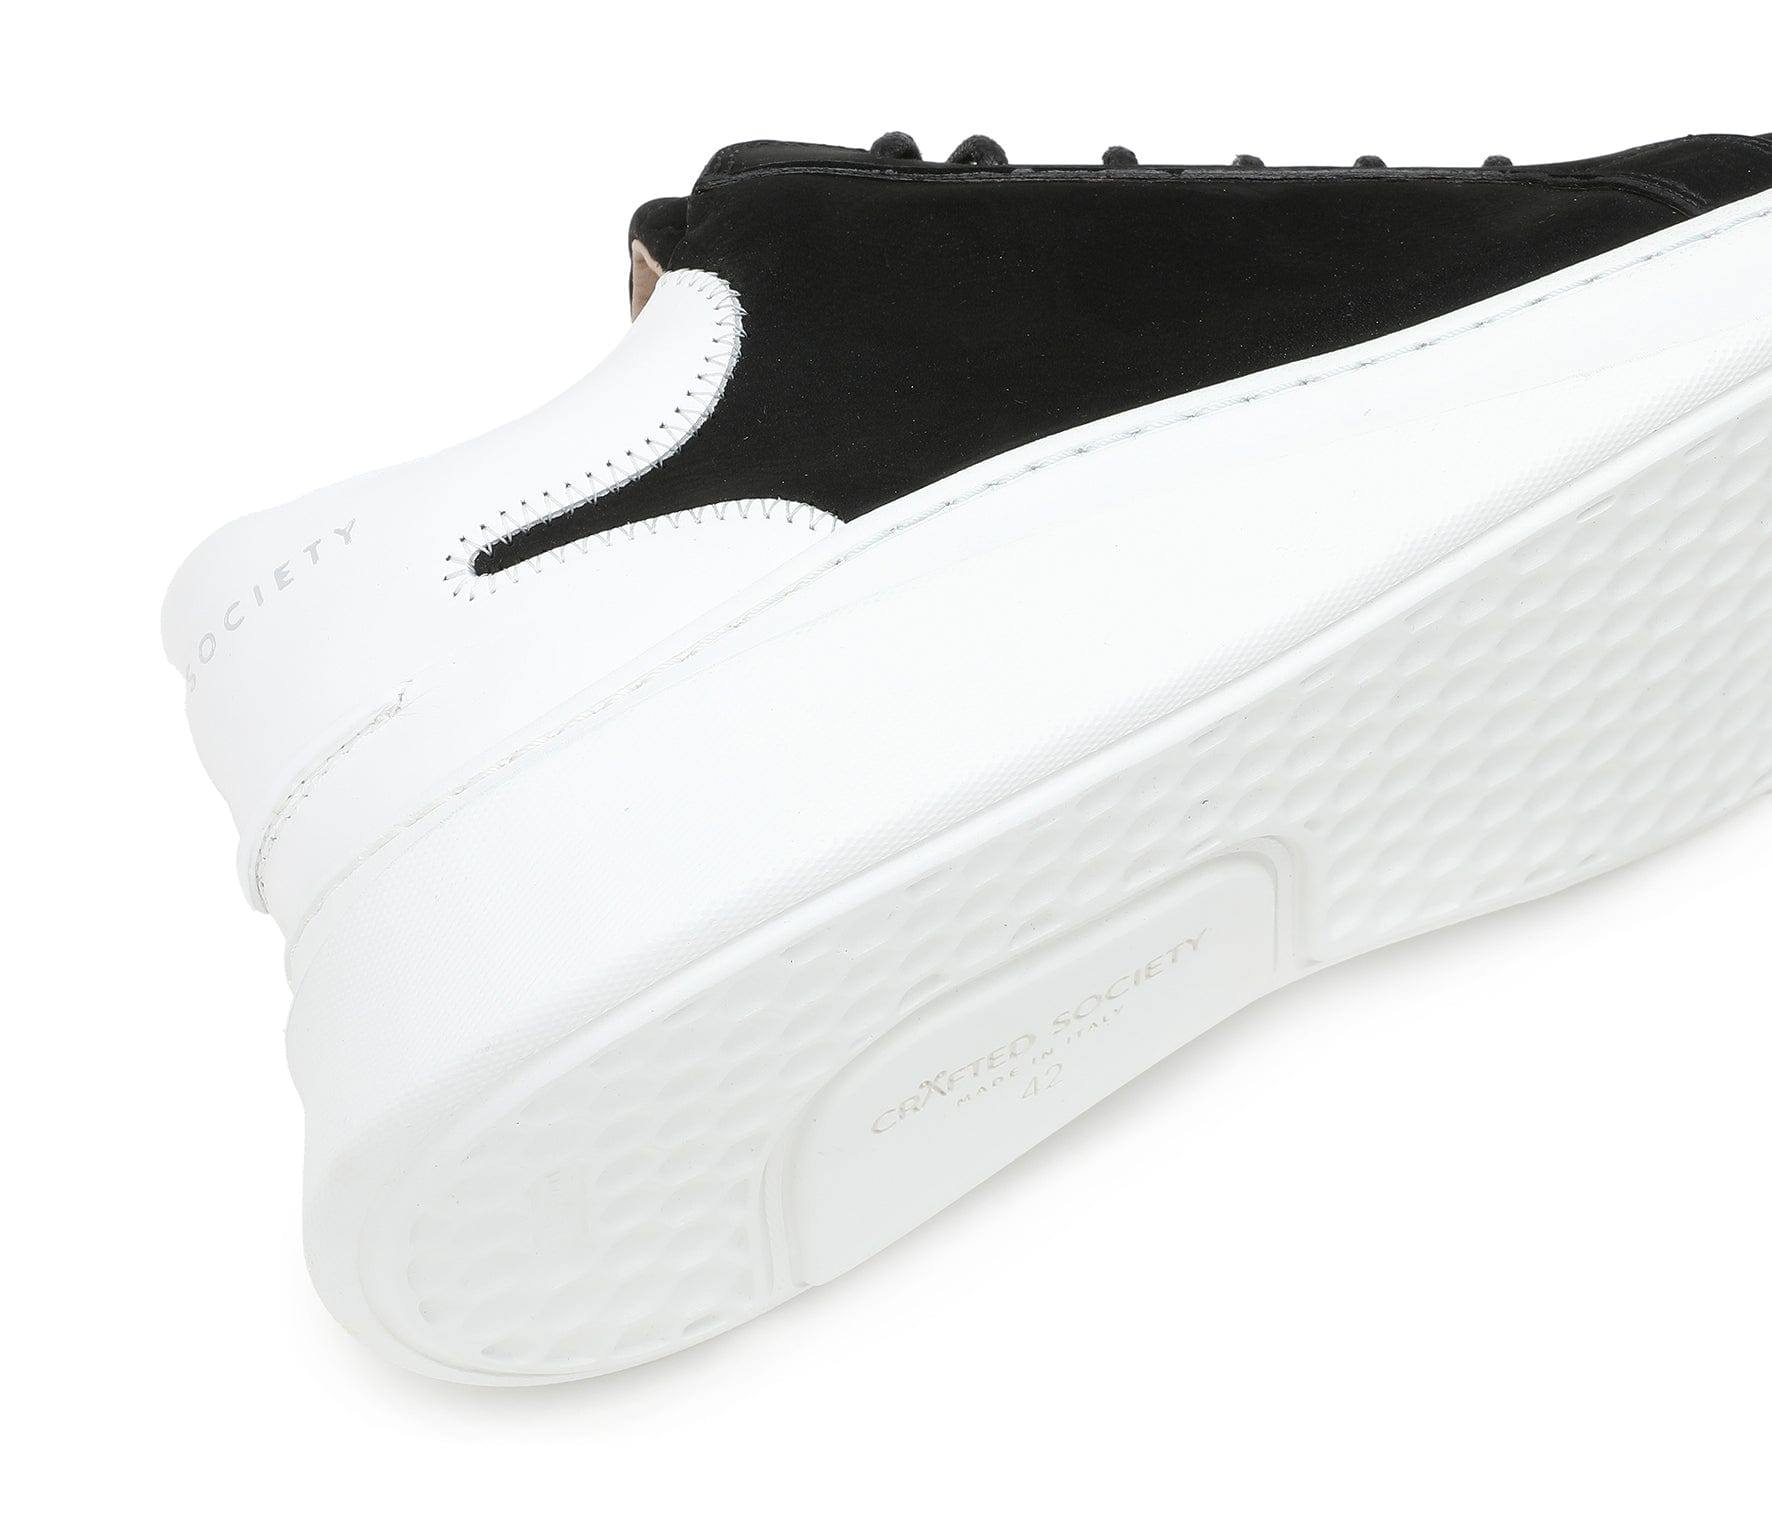 Matteo Low Top Sneaker | Black Nubuck | White Outsole | Made in Italy